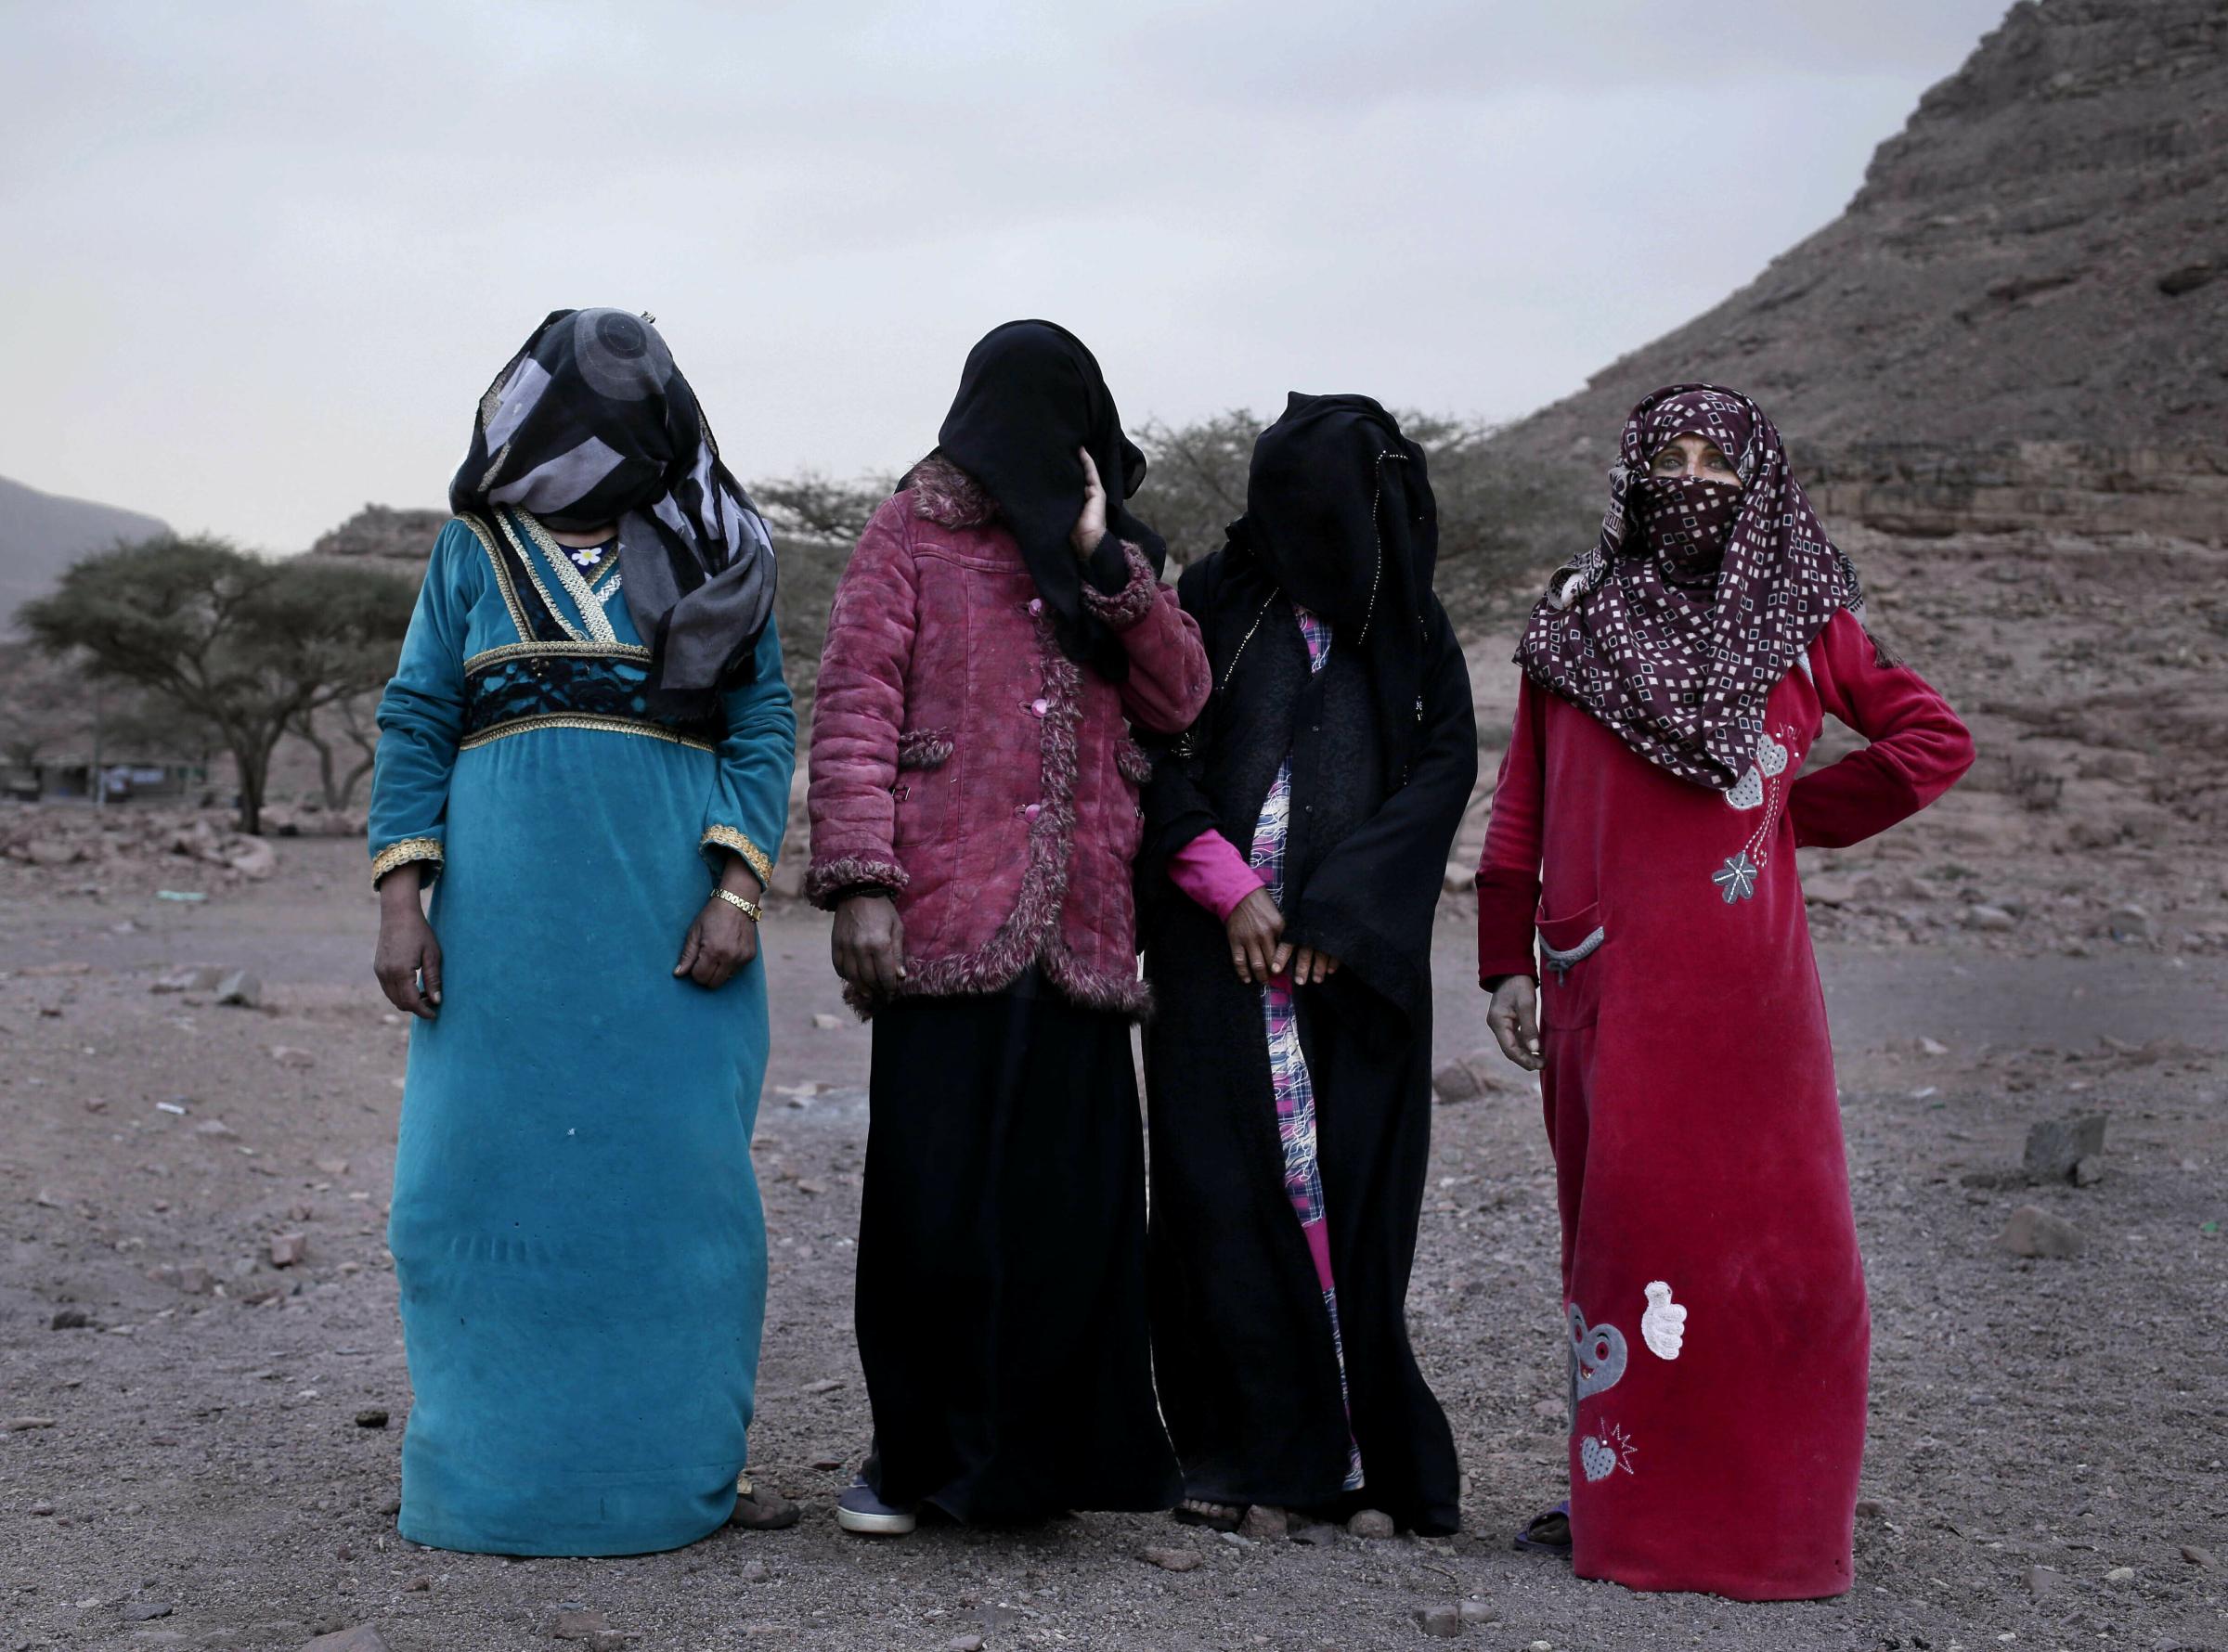 Bedouin women lead first tour in Egypt’s Sinai - The first female Bedouin guides Umm Yasser, Umm Soliman,...